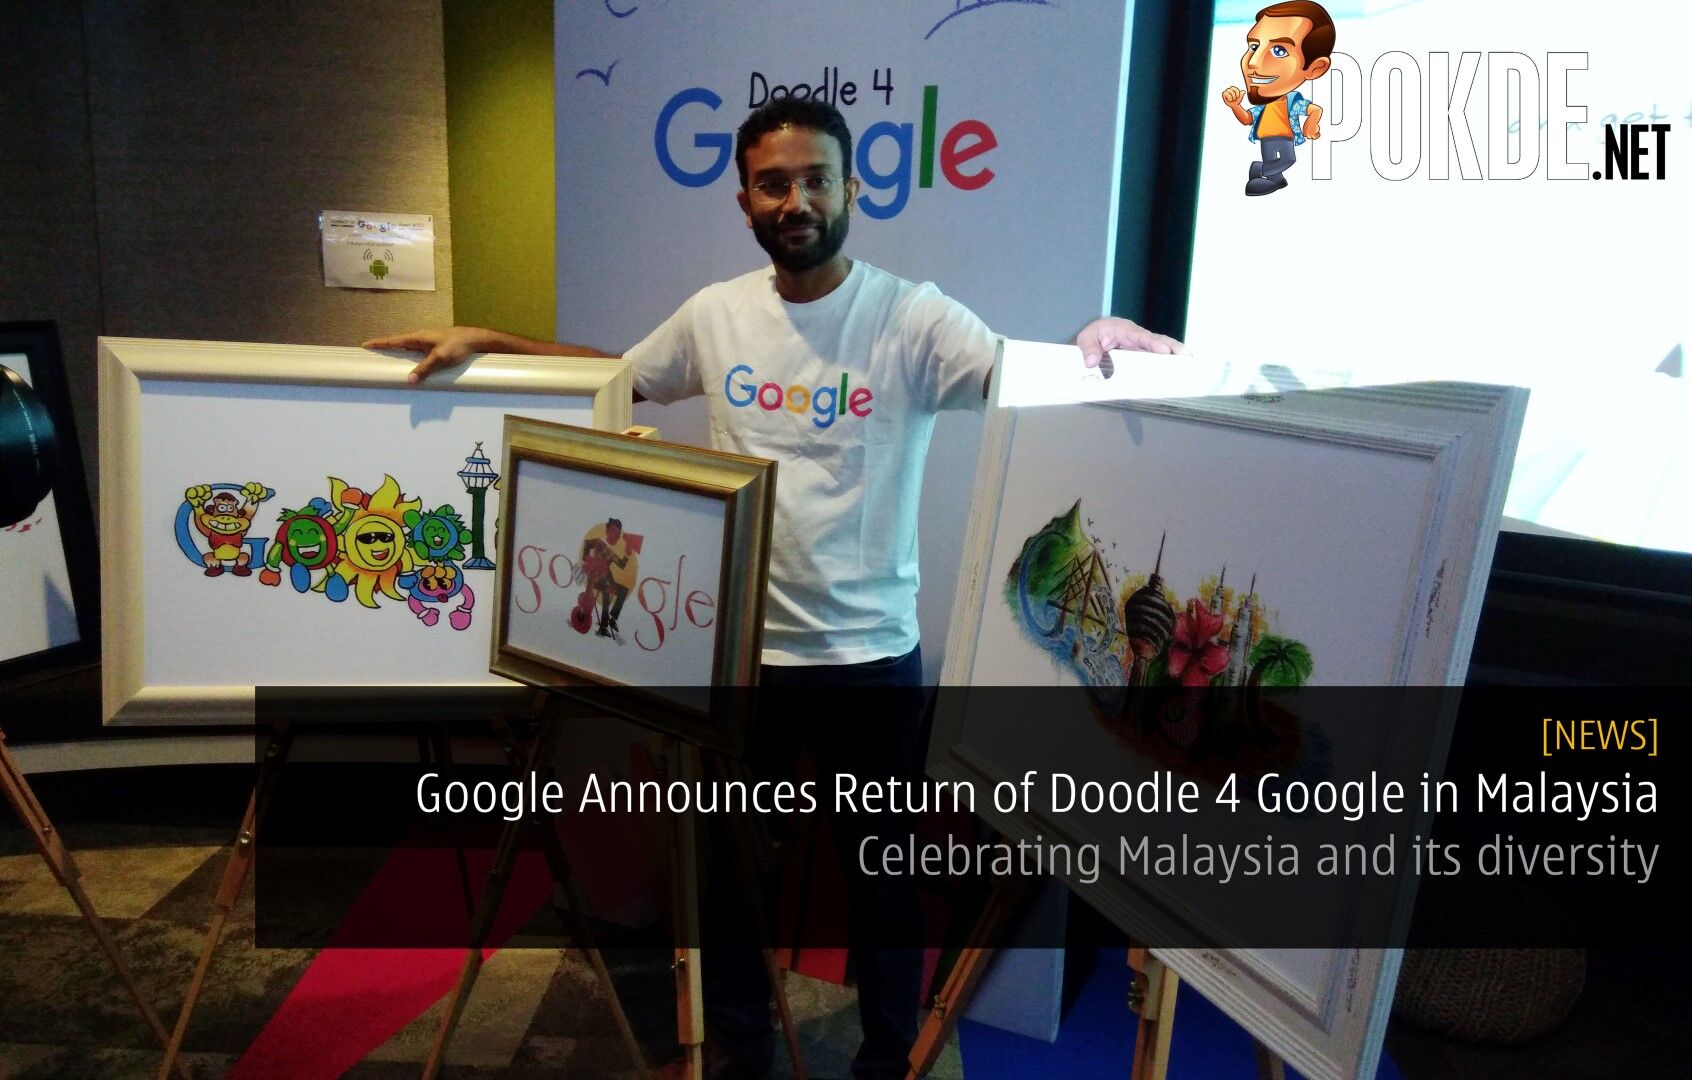 Google Announces Return of Doodle 4 Google in Malaysia - Celebrating Malaysia and its diversity 22